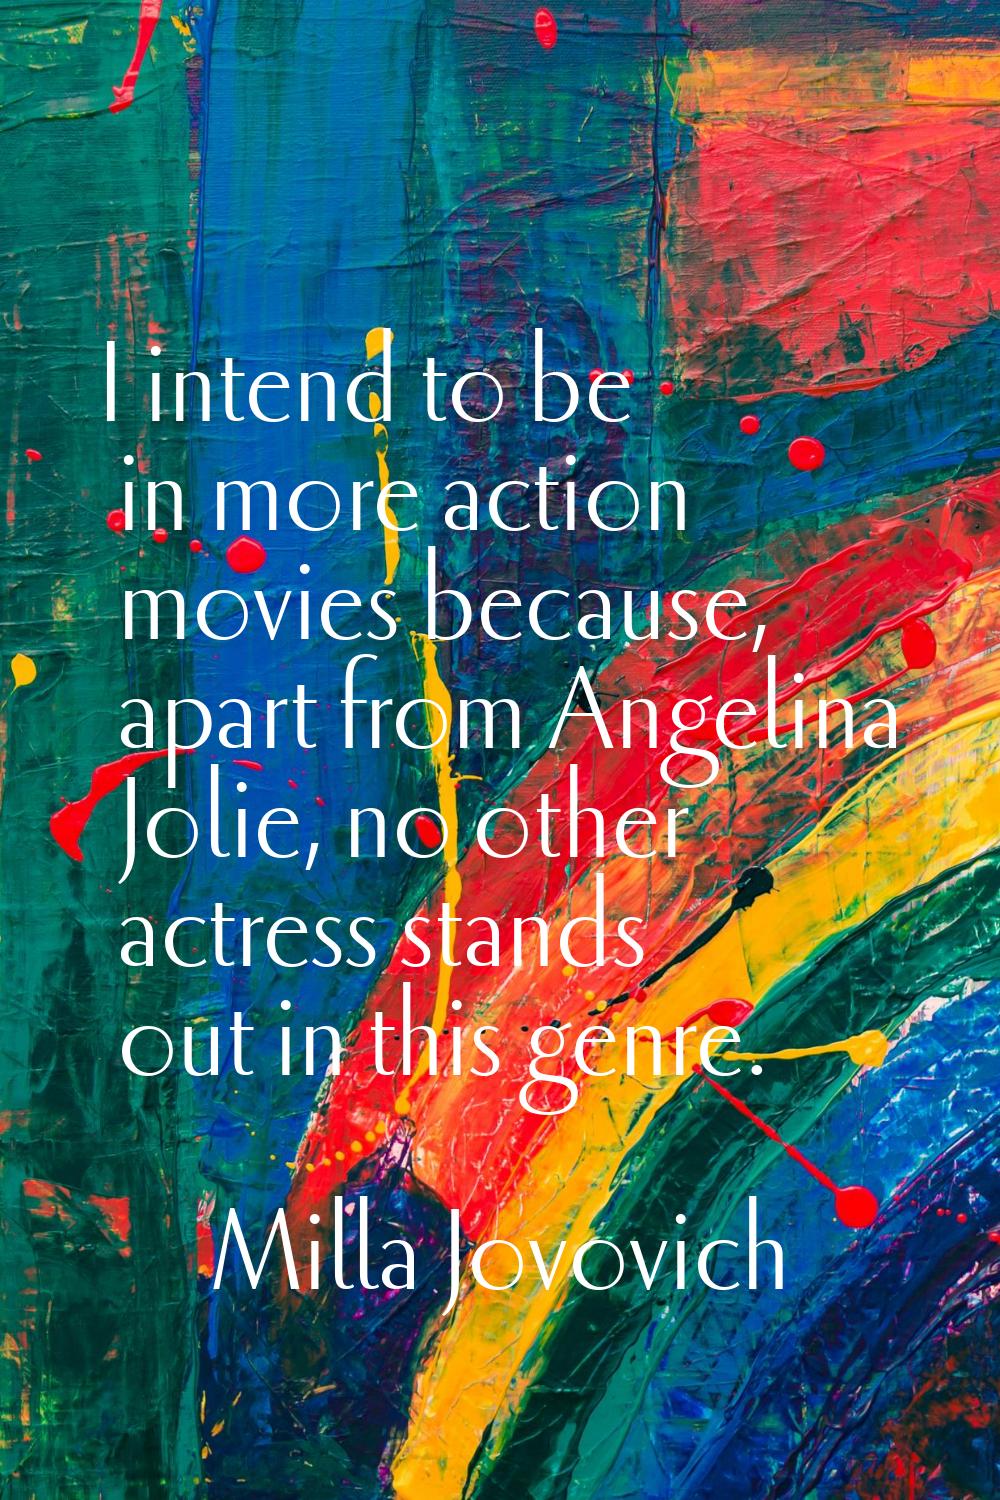 I intend to be in more action movies because, apart from Angelina Jolie, no other actress stands ou